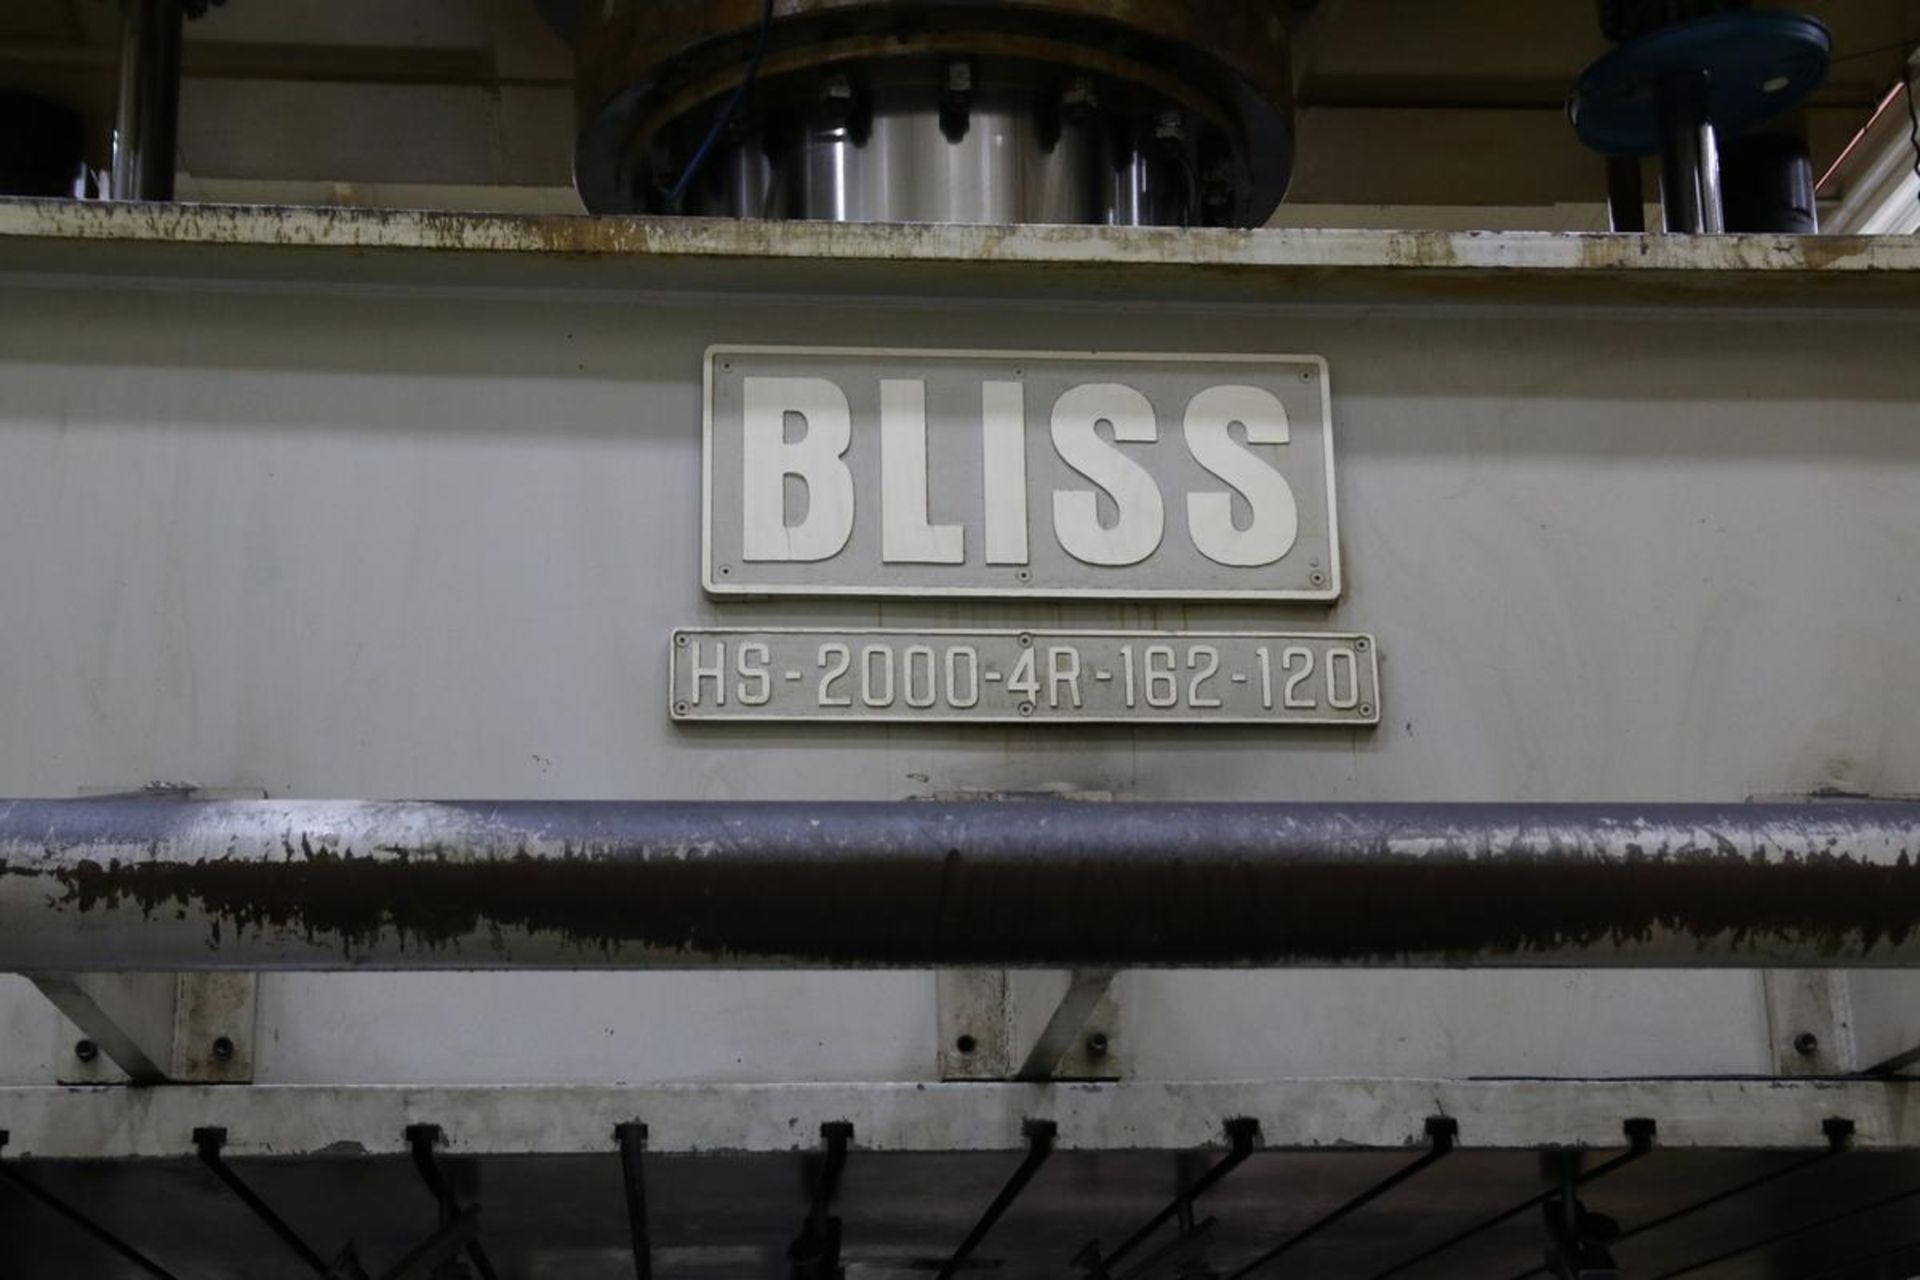 1967 Bliss HS-2000 4R-162-120 4-Post Hydraulic Try Out Press - Image 17 of 22